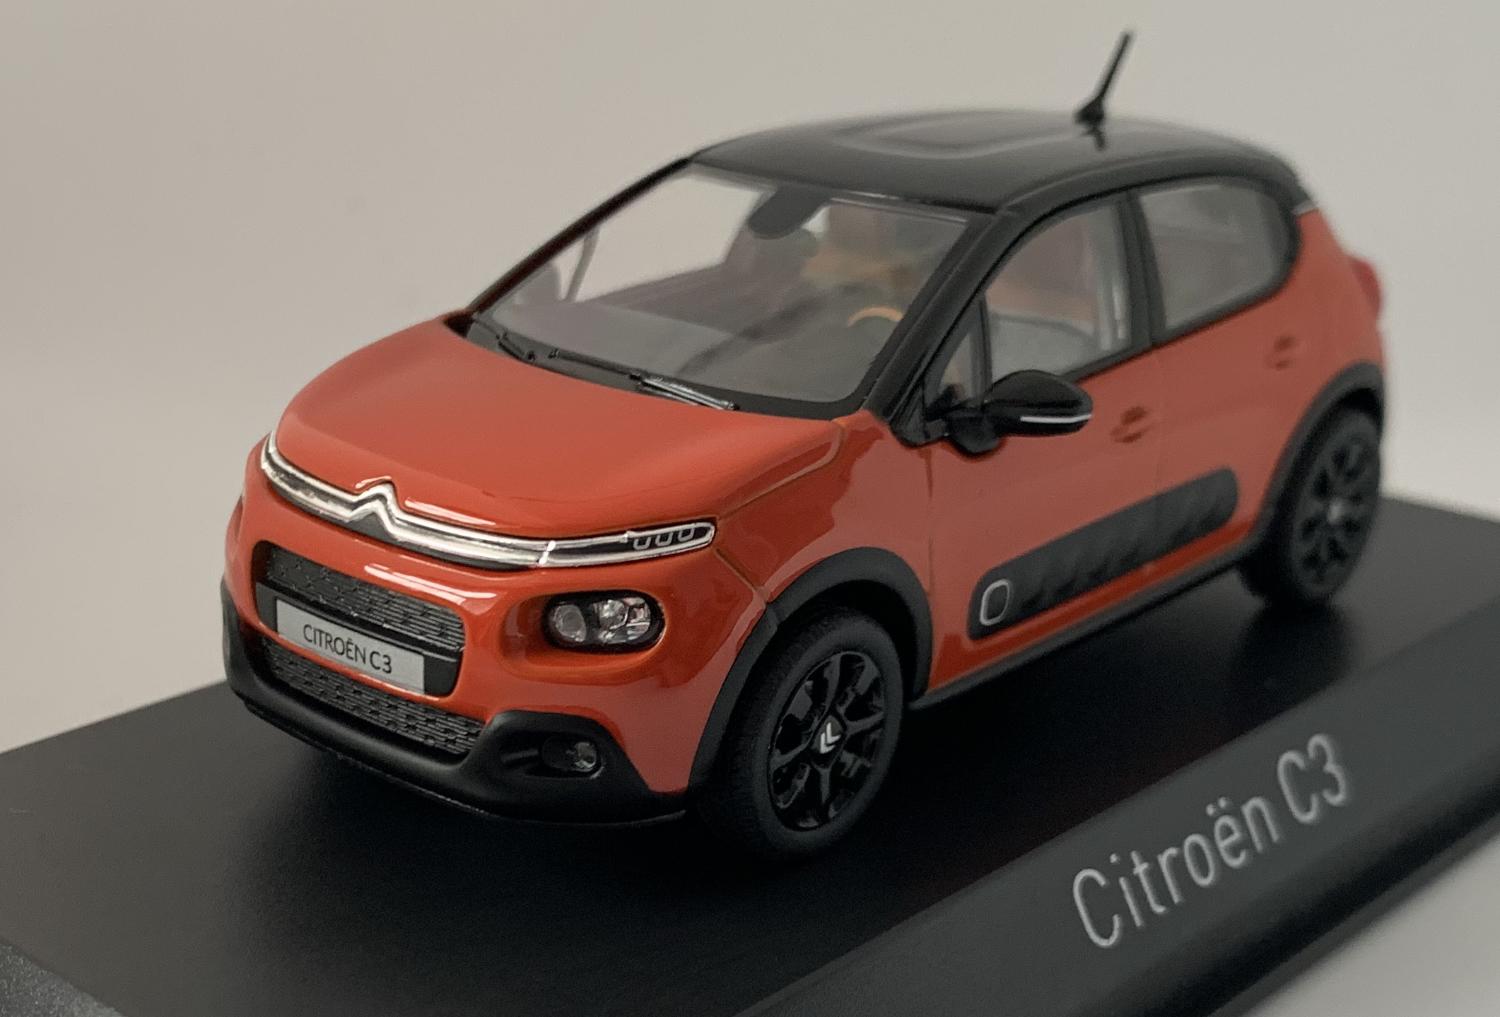 An excellent reproduction of the Citroen C3 with detail throughout, all authentically recreated. Model is mounted on a removable plinth with a removable hard plastic cover